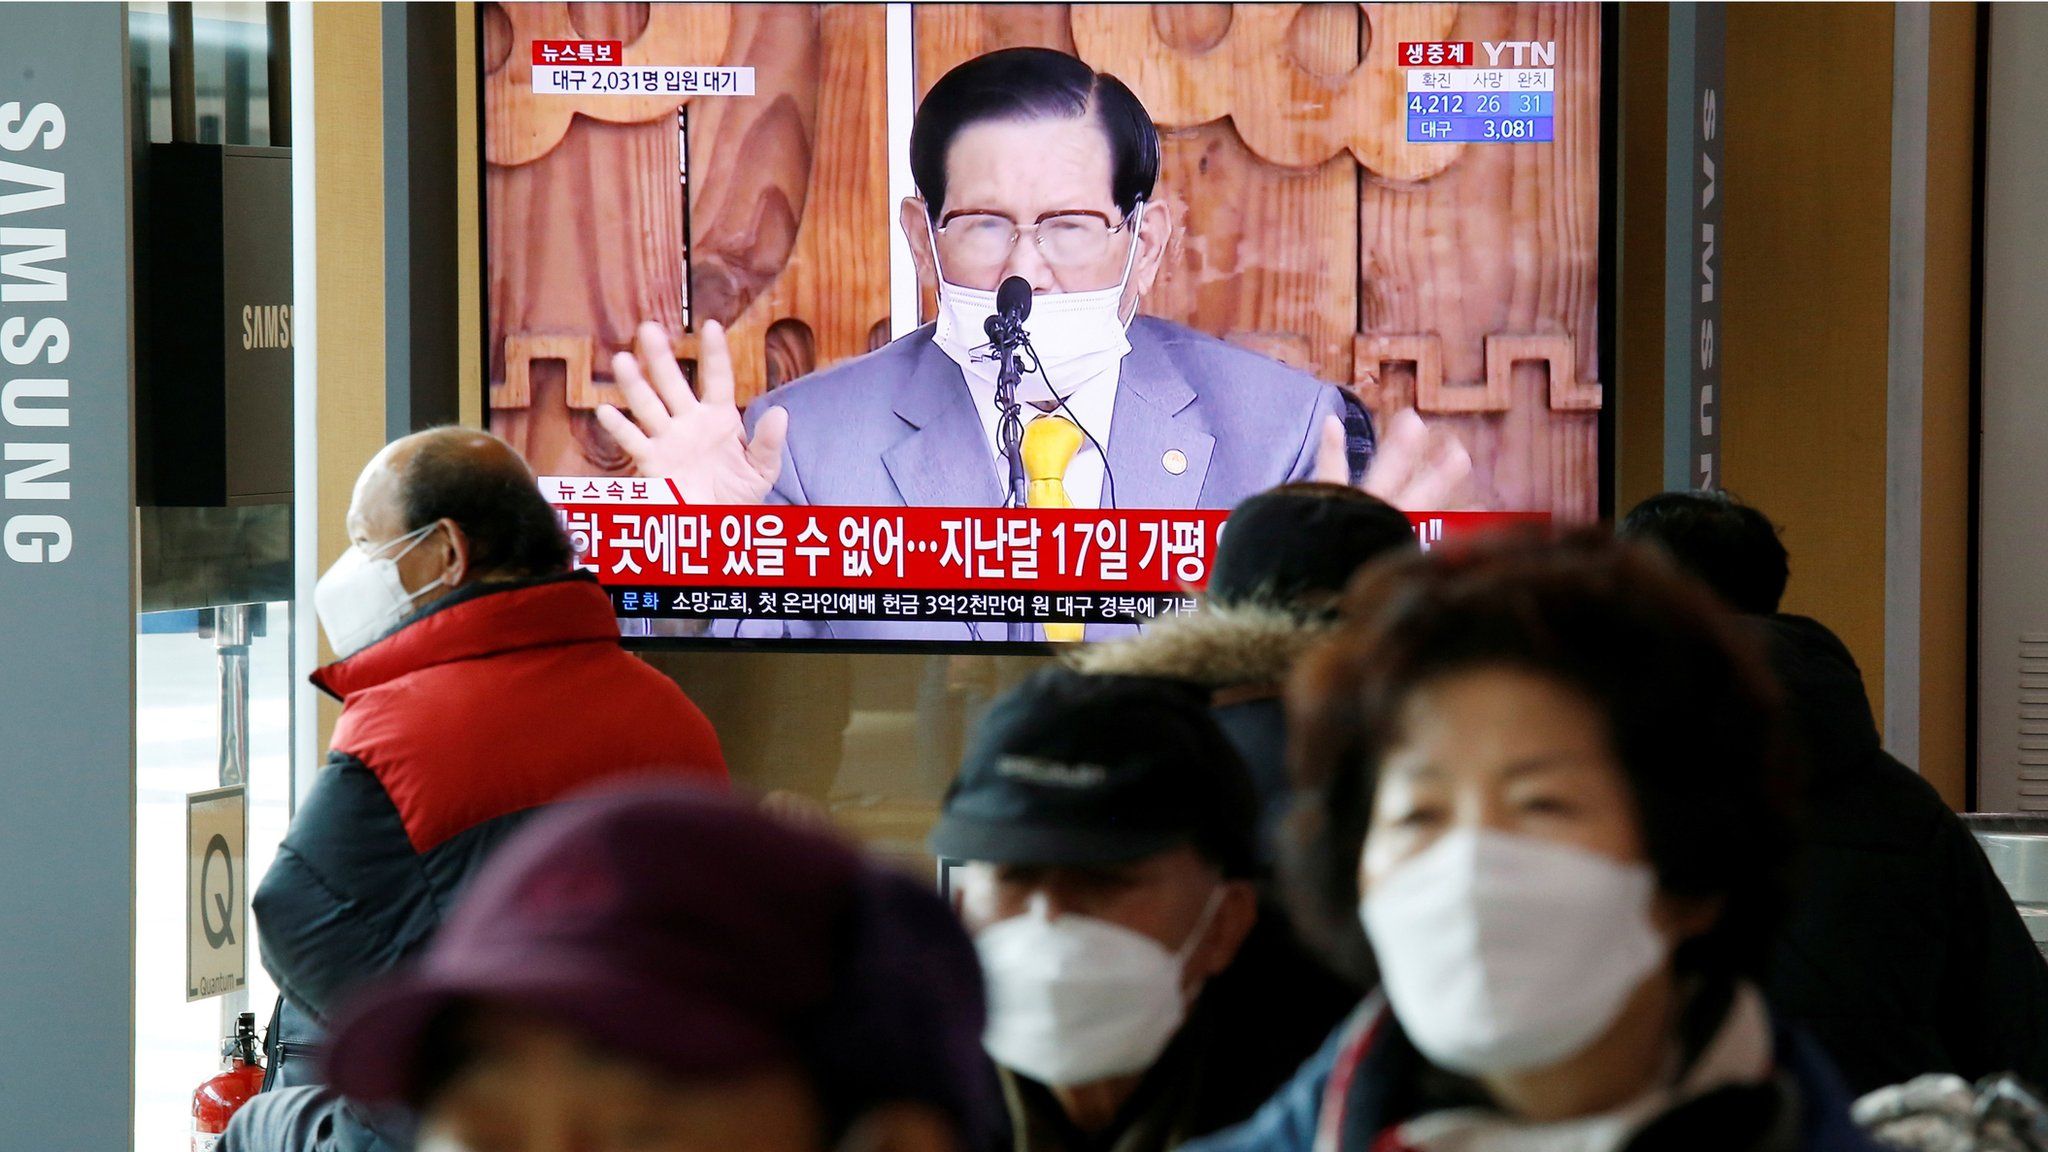 People watch a TV broadcasting a news report on a news conference held by Lee Man-hee, founder of the Shincheonji Church of Jesus the Temple of the Tabernacle of the Testimony, in Seoul, South Korea, March 2, 2020